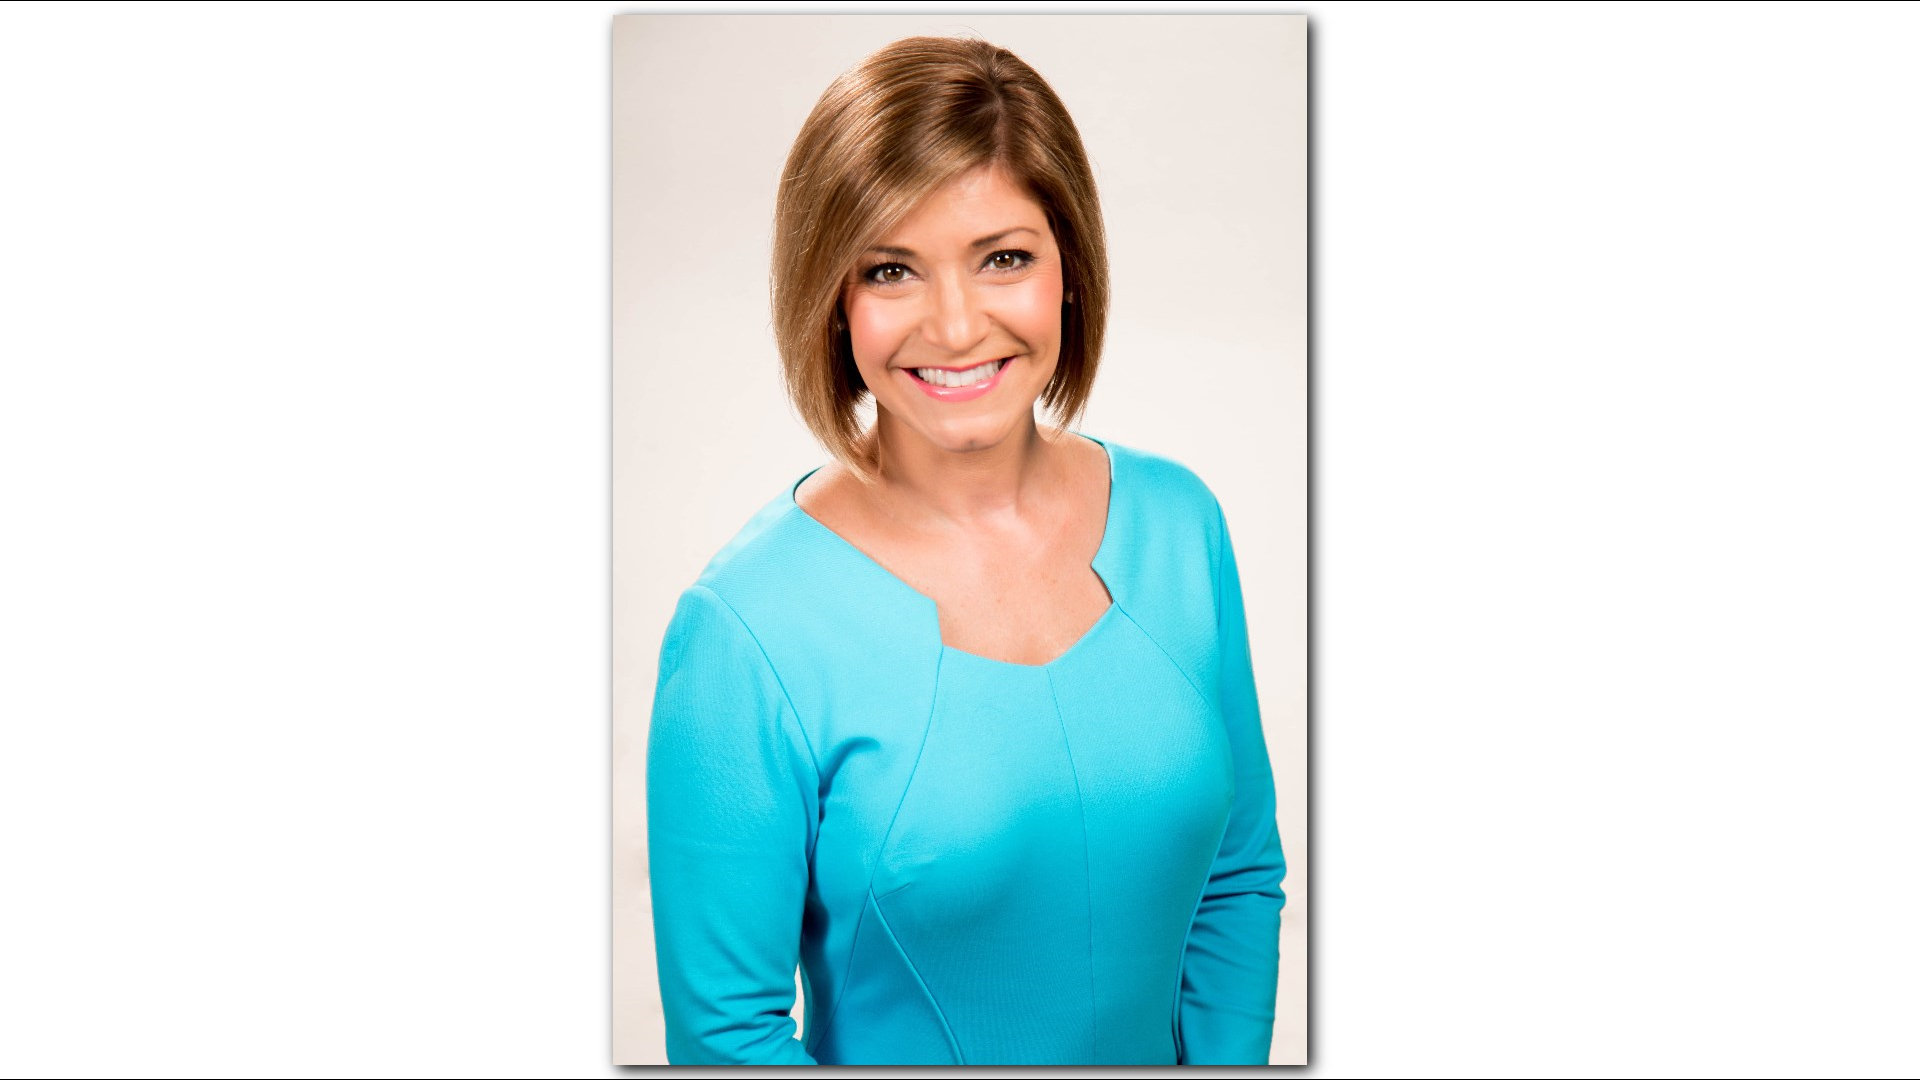 You've watched Robin Wilhoit on 10News for more than 20 years. Get to know her a little better!